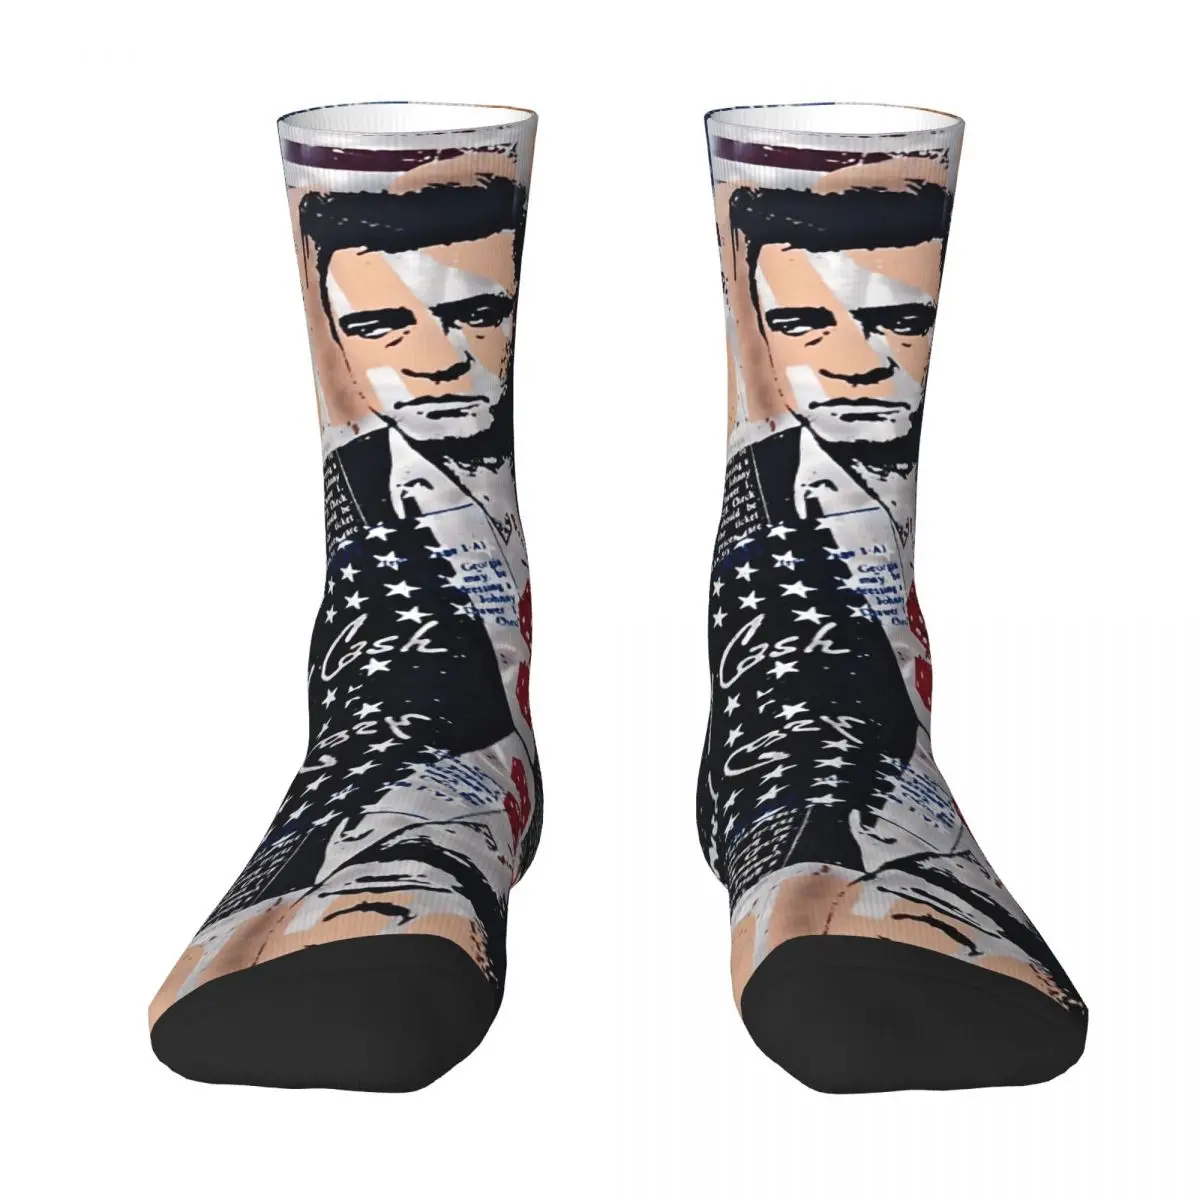 

premium Johnny And Cash The Man In Black Mounted Pri R241 Stocking BEST TO BUY Blanket roll Compression SocksHumor Graphic